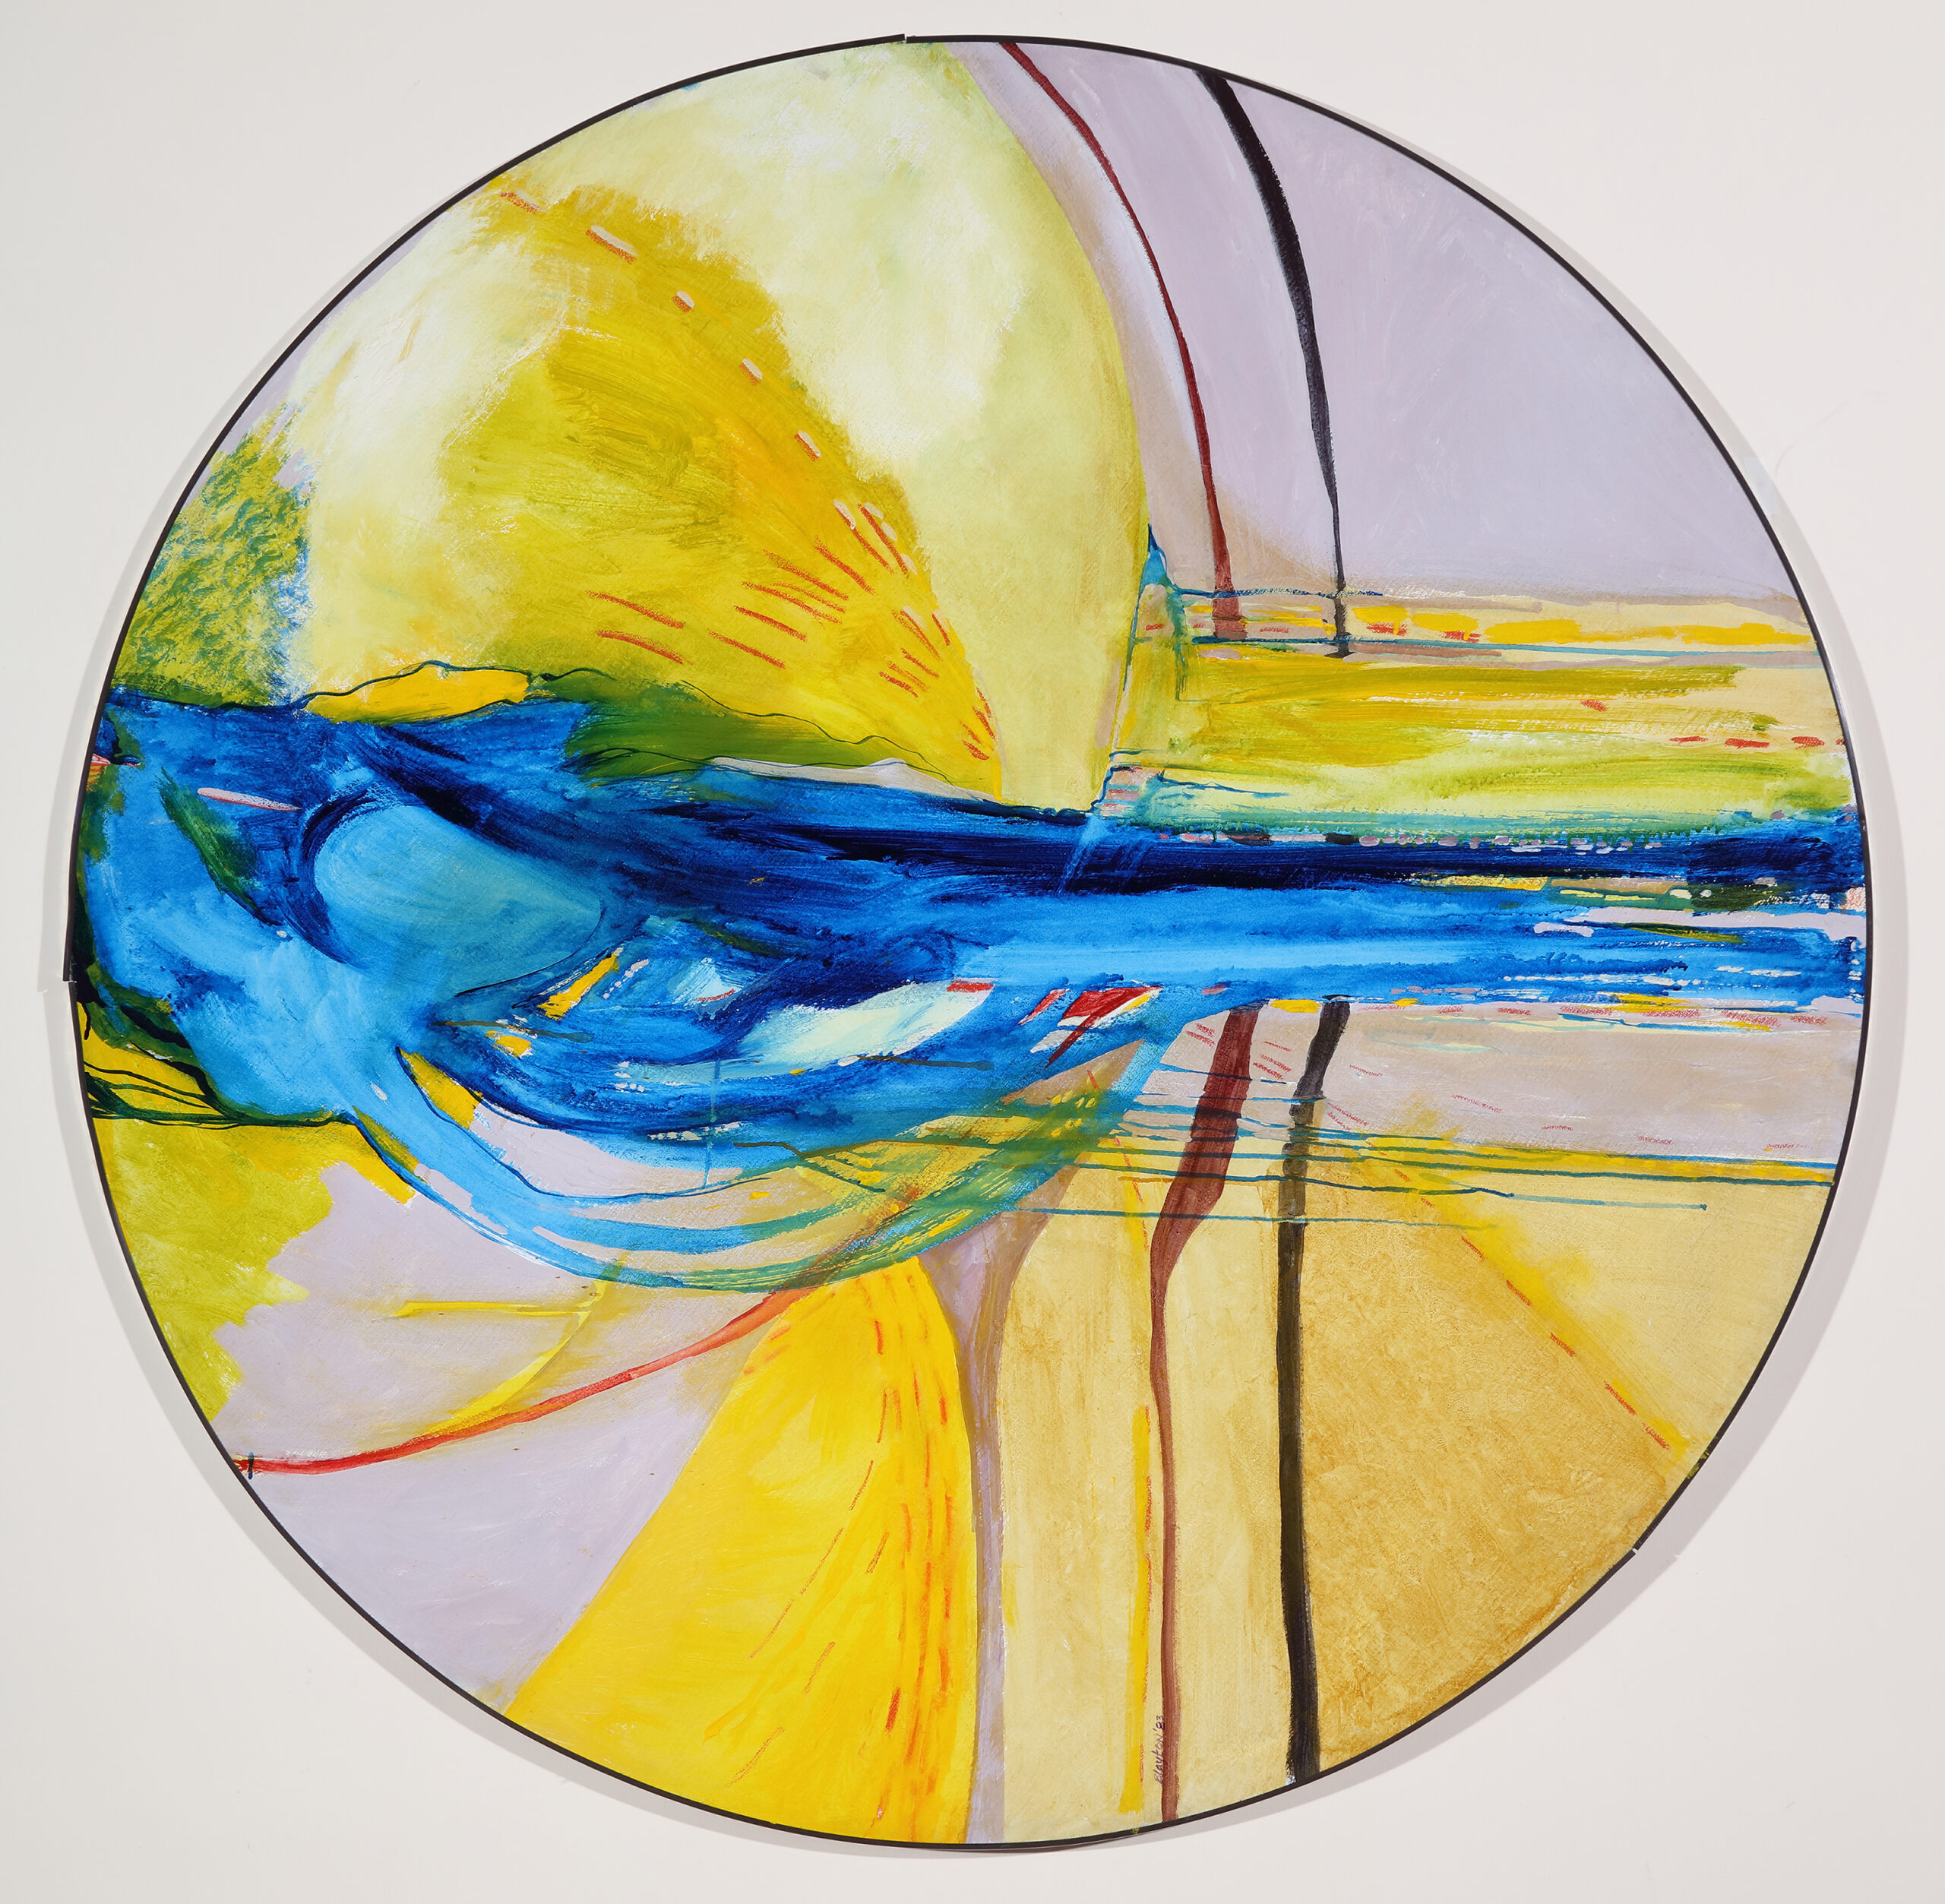 Betty Blayton (1937 - 2016), Vibes Penetrated, 1983, acrylic on canvas, diameter: 60 3/4 in. Spelman College Museum of Fine Art. Spelman College Purchase. © Estate of Betty Blayton